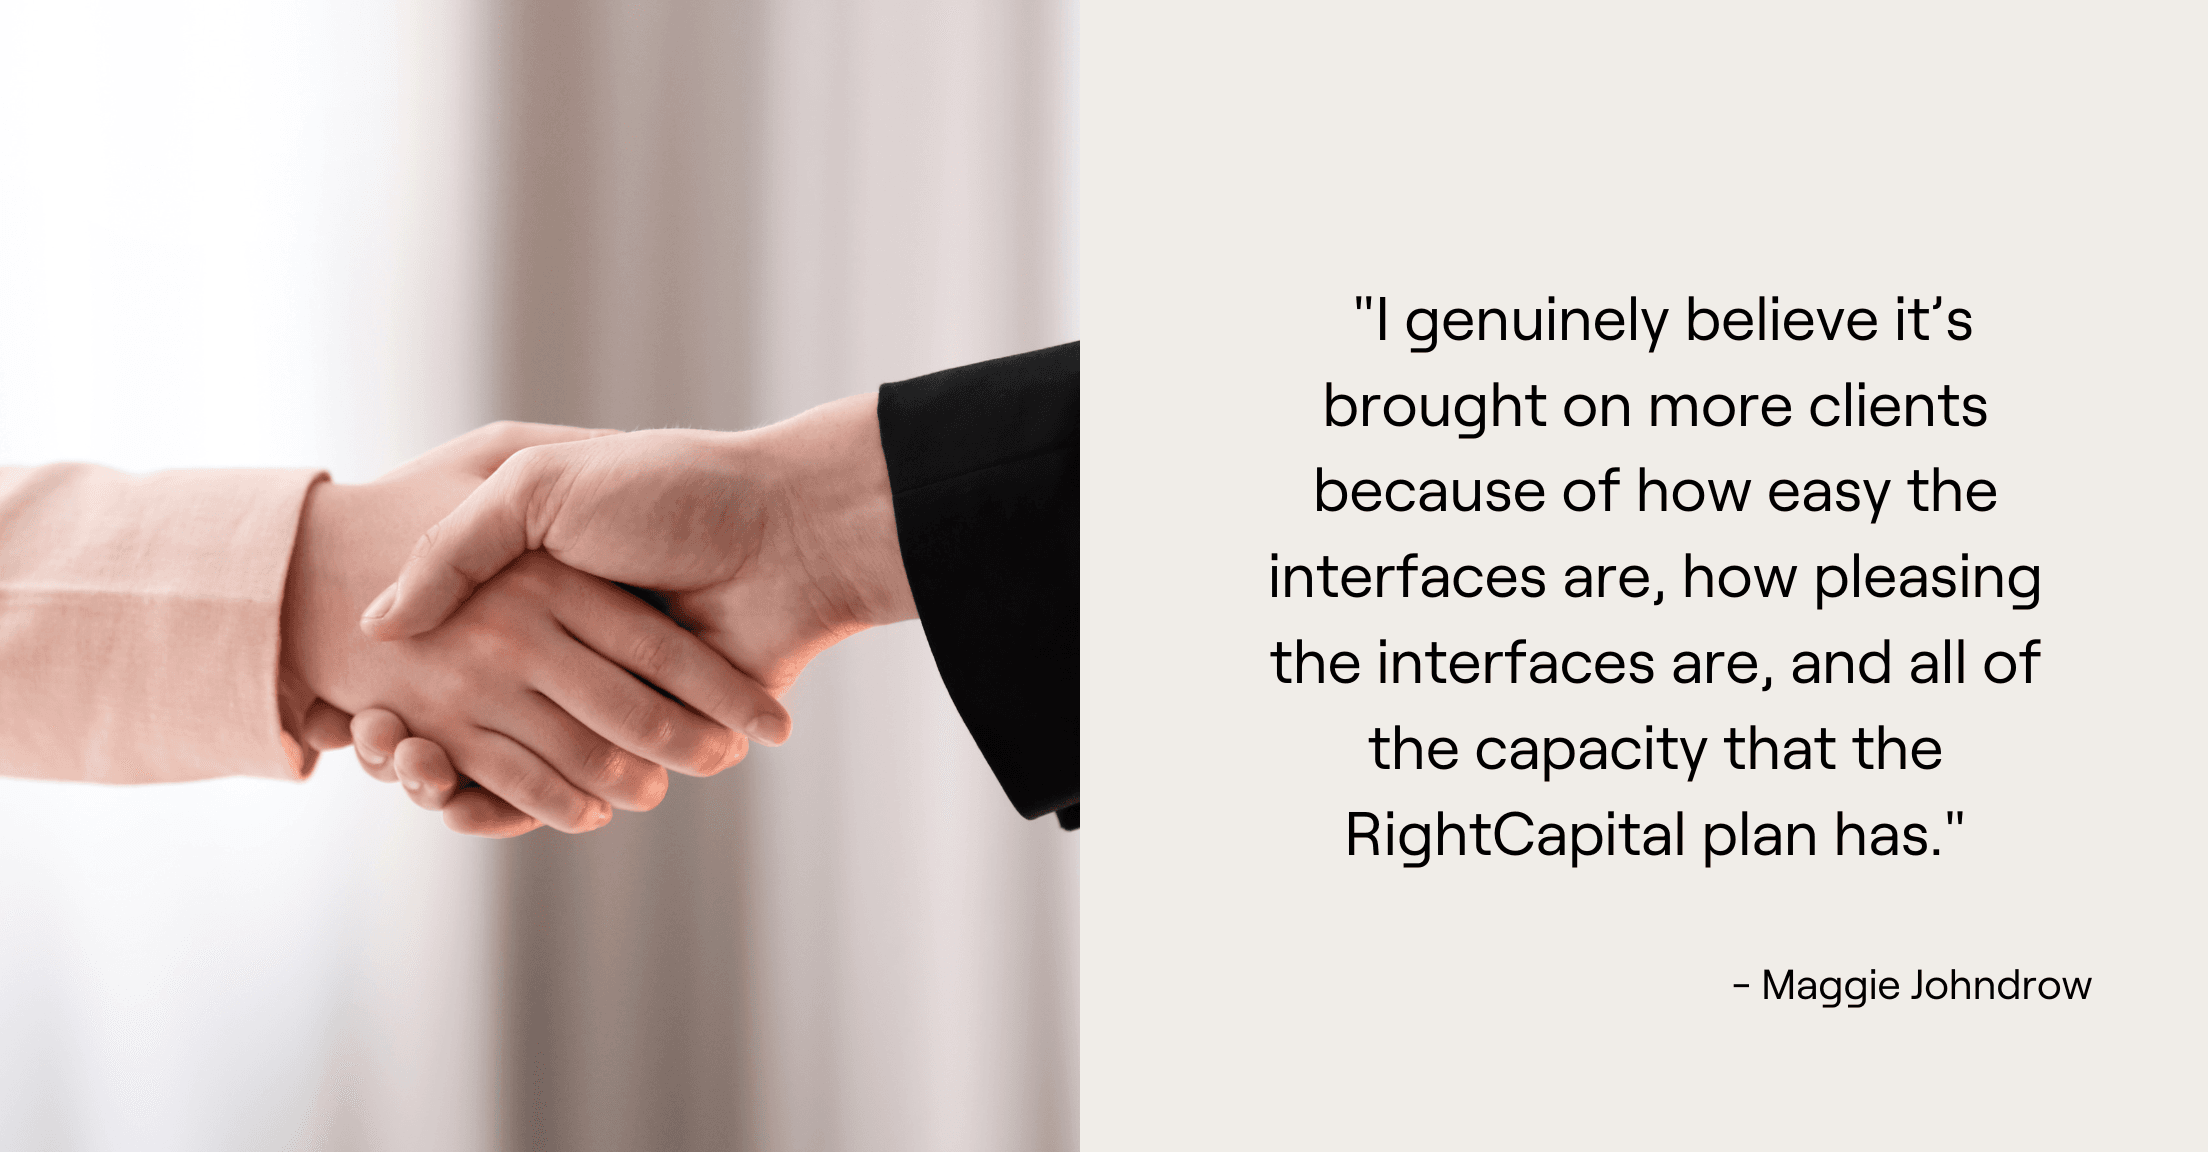 Handshake and Maggie Johndrow quote,  "I genuinely believe it’s brought on more clients because of how easy the interfaces are, how pleasing the interfaces are, and all of the capacity that the RightCapital plan has."